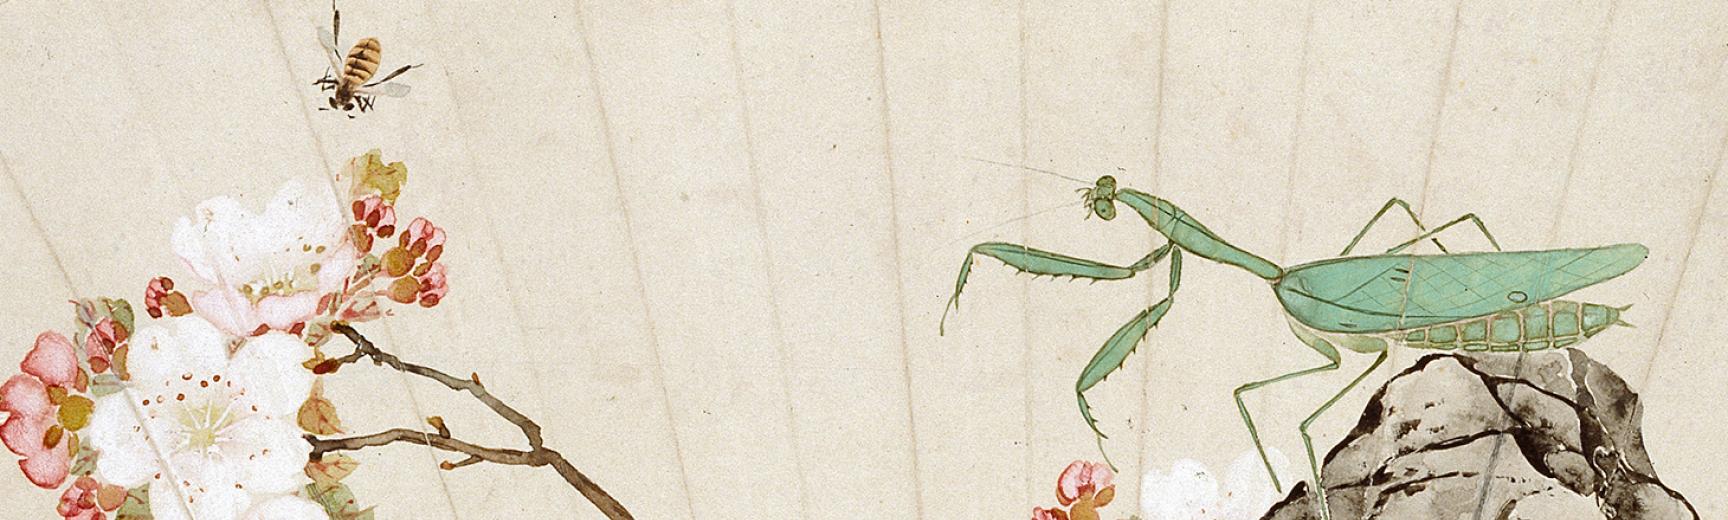 Praying mantis, bee, and prunus blossom Chinese fan, 1881